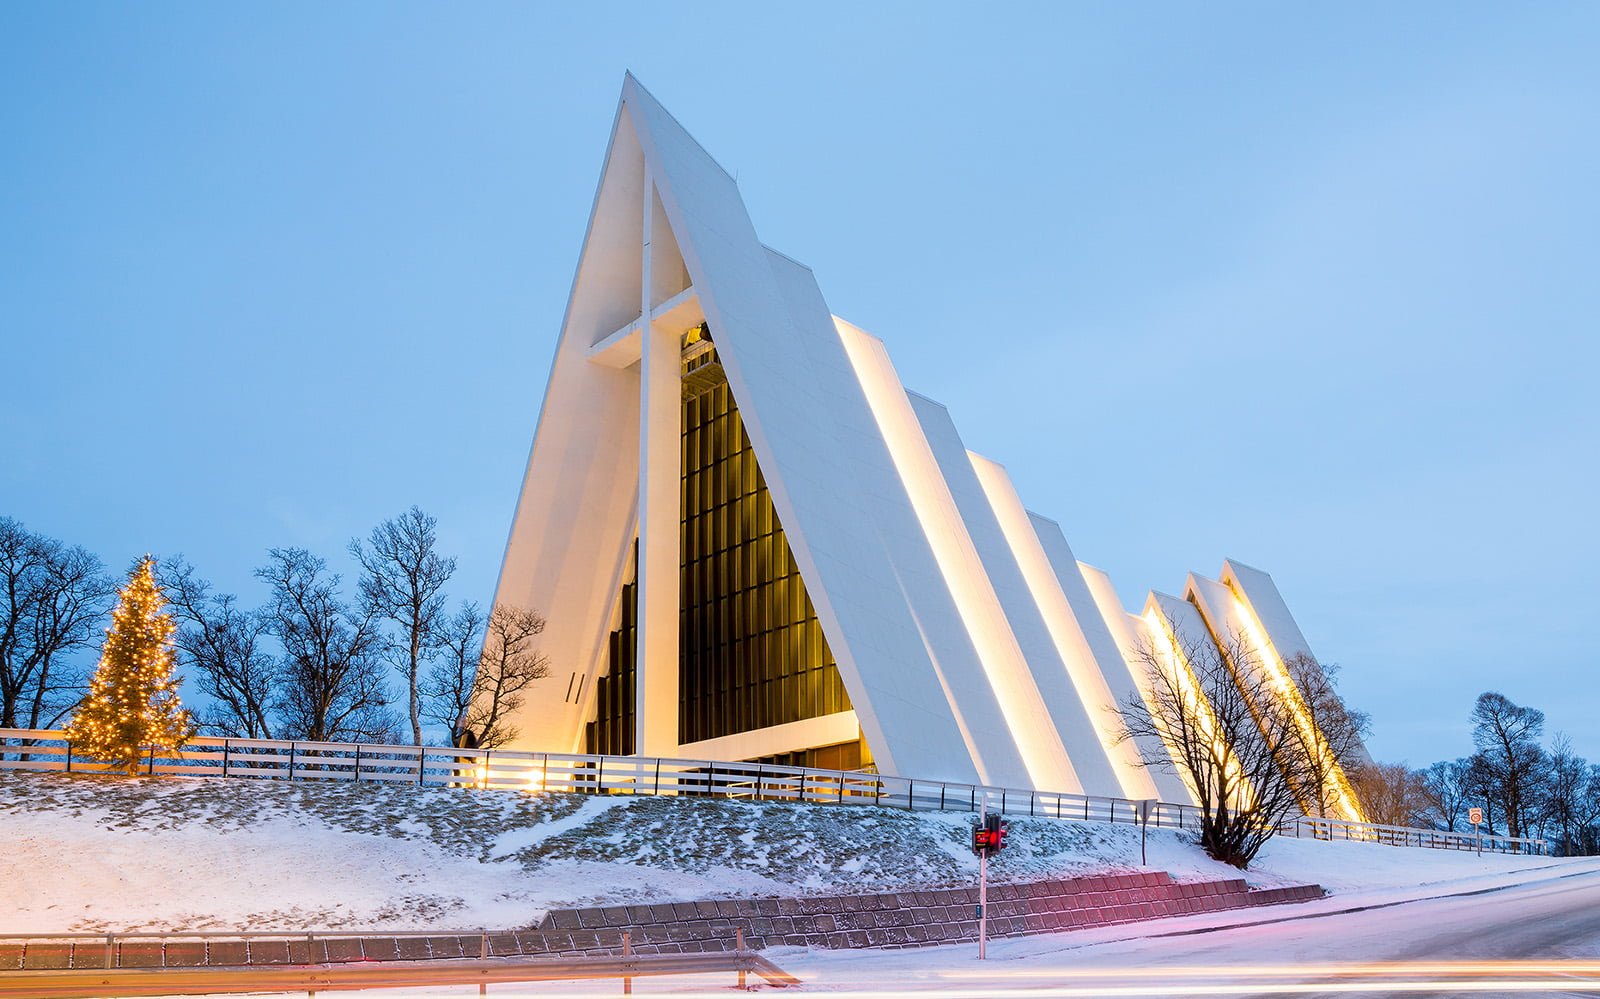 In Pictures: The Arctic Cathedral of Tromsø - Life in Norway